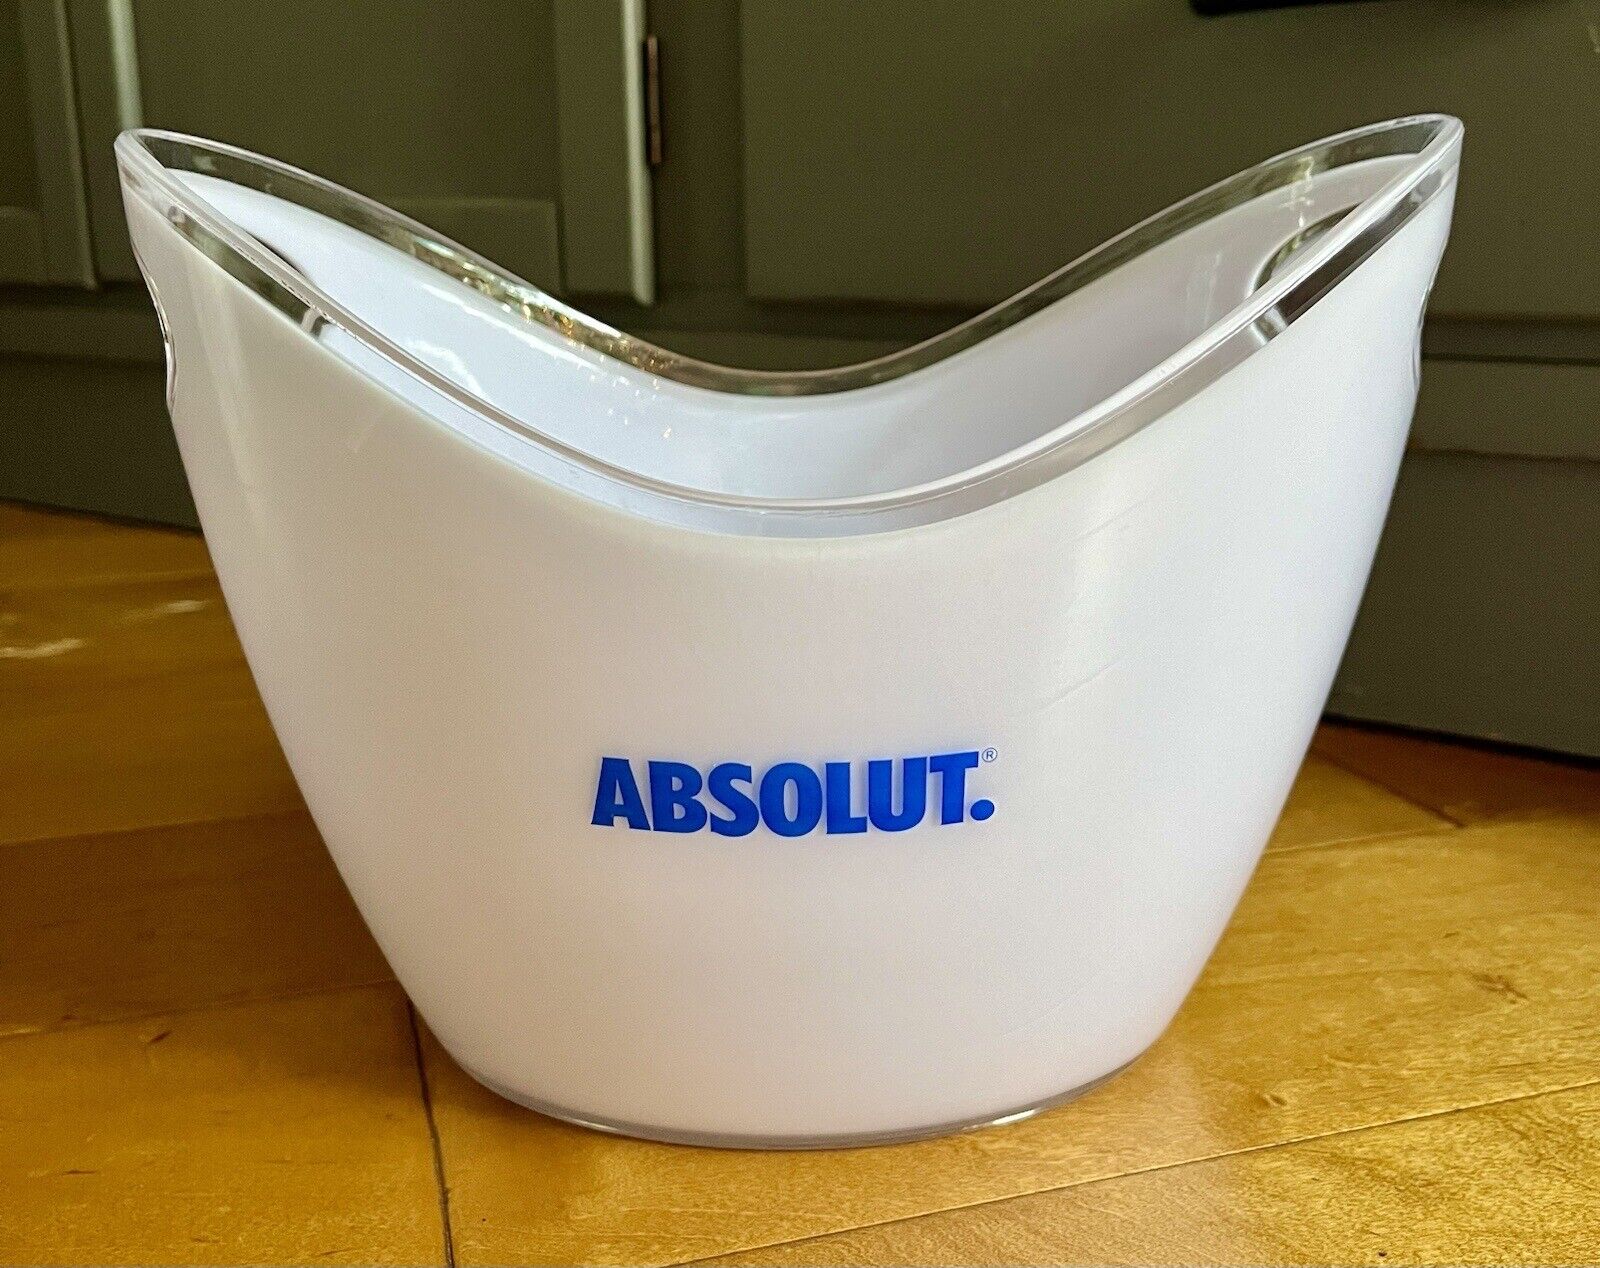 Absolut Vodka Thick Acrylic White Bottle Service Ice Bucket w/ Handles BRAND NEW